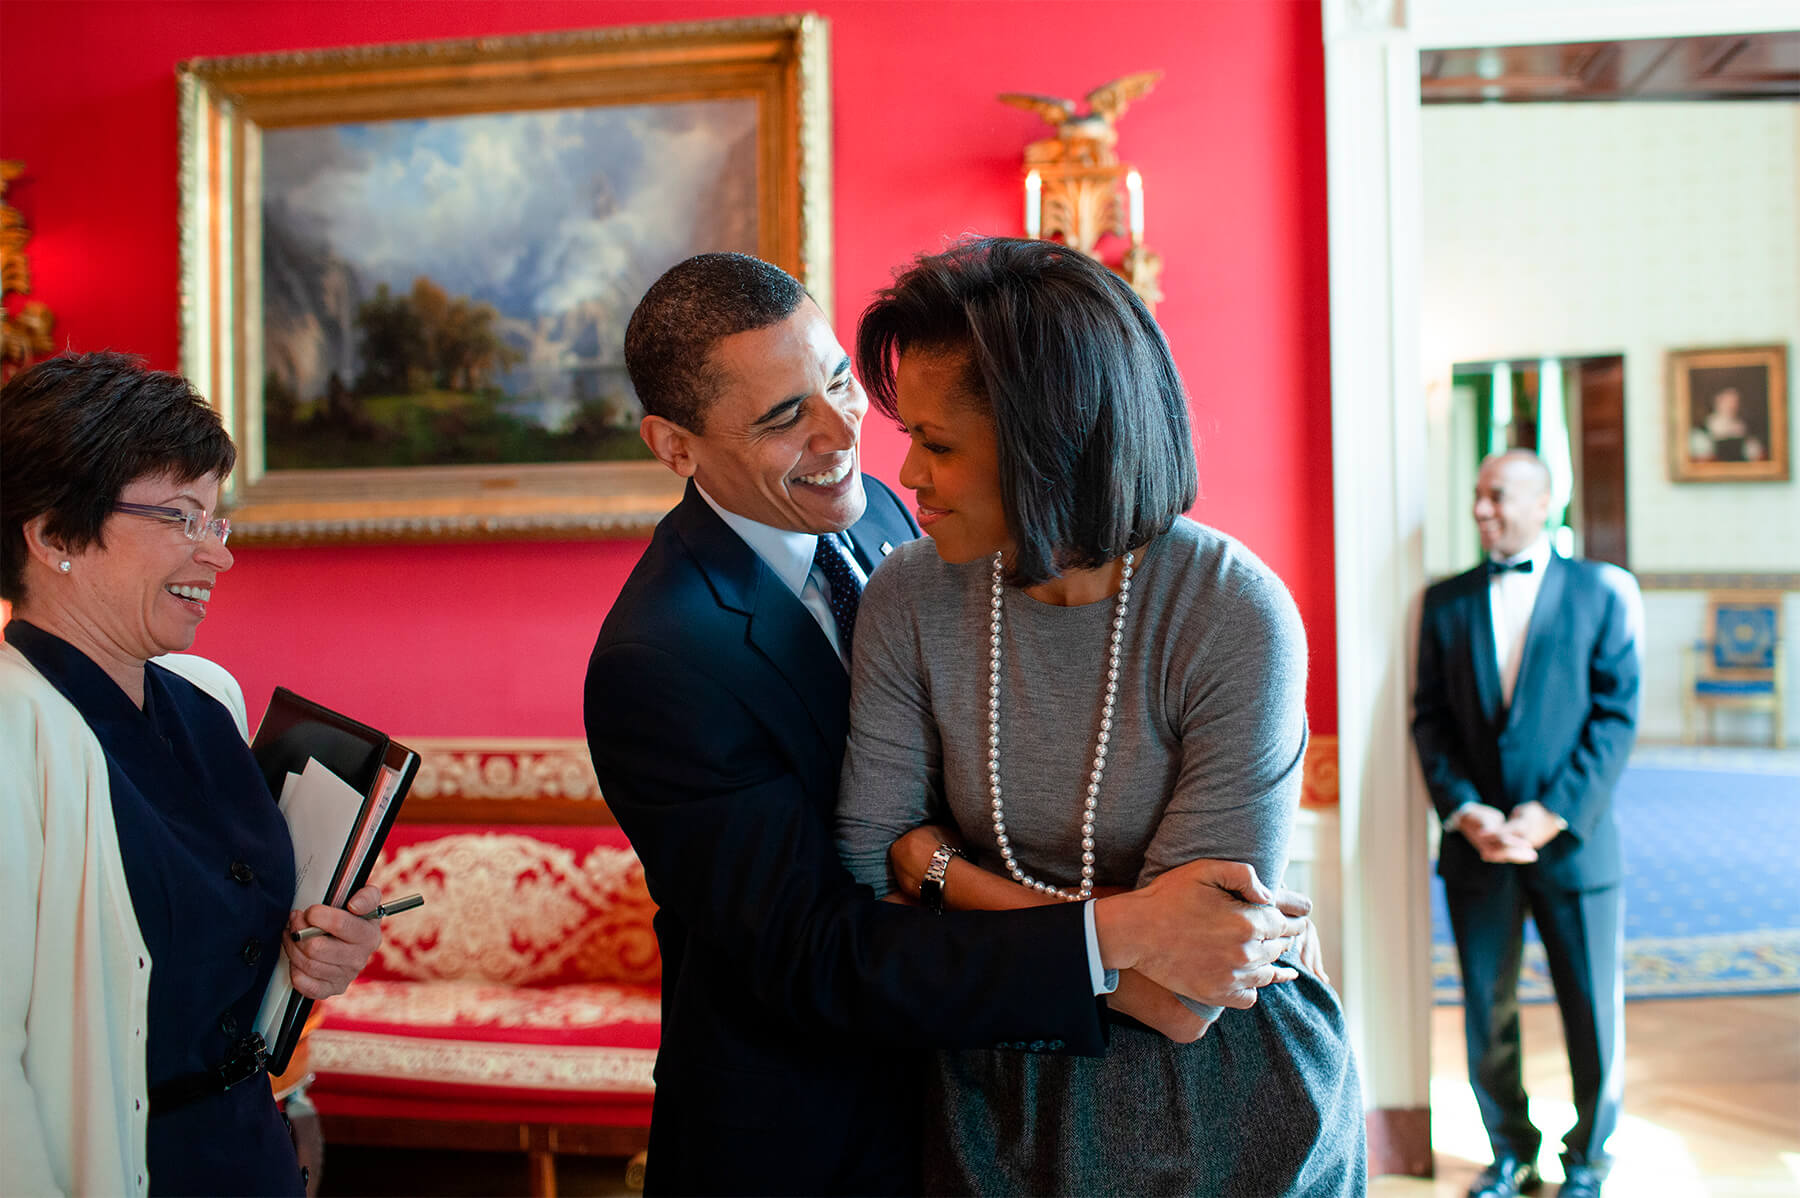 President Barack Obama hugs First Lady Michelle Obama in the Red Room of the White House, with senior advisor Valerie Jarrett, March 20th 2009.